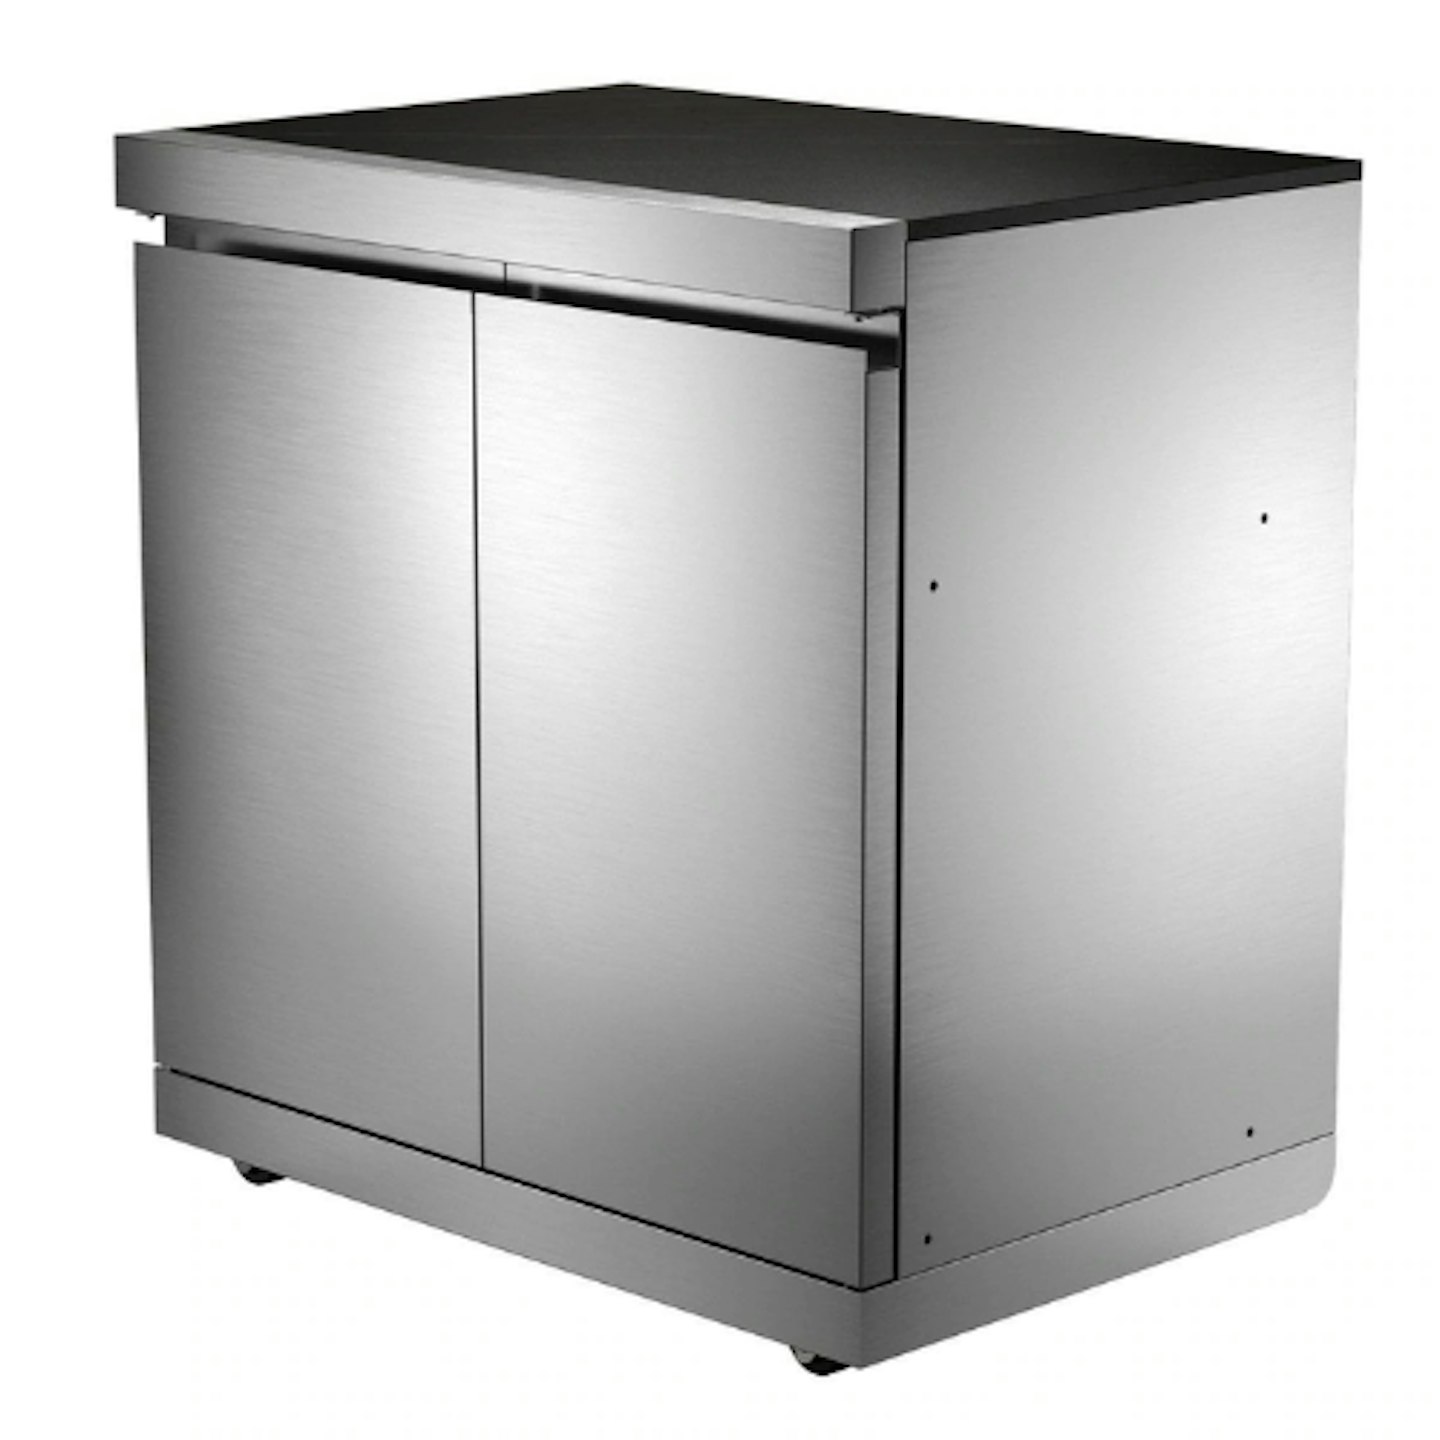 https://www.limelace.co.uk/collections/outdoor-kitchen-pizza-oven-bbq-grills/products/cirencester-double-door-storage-cabinet-whistler-grills